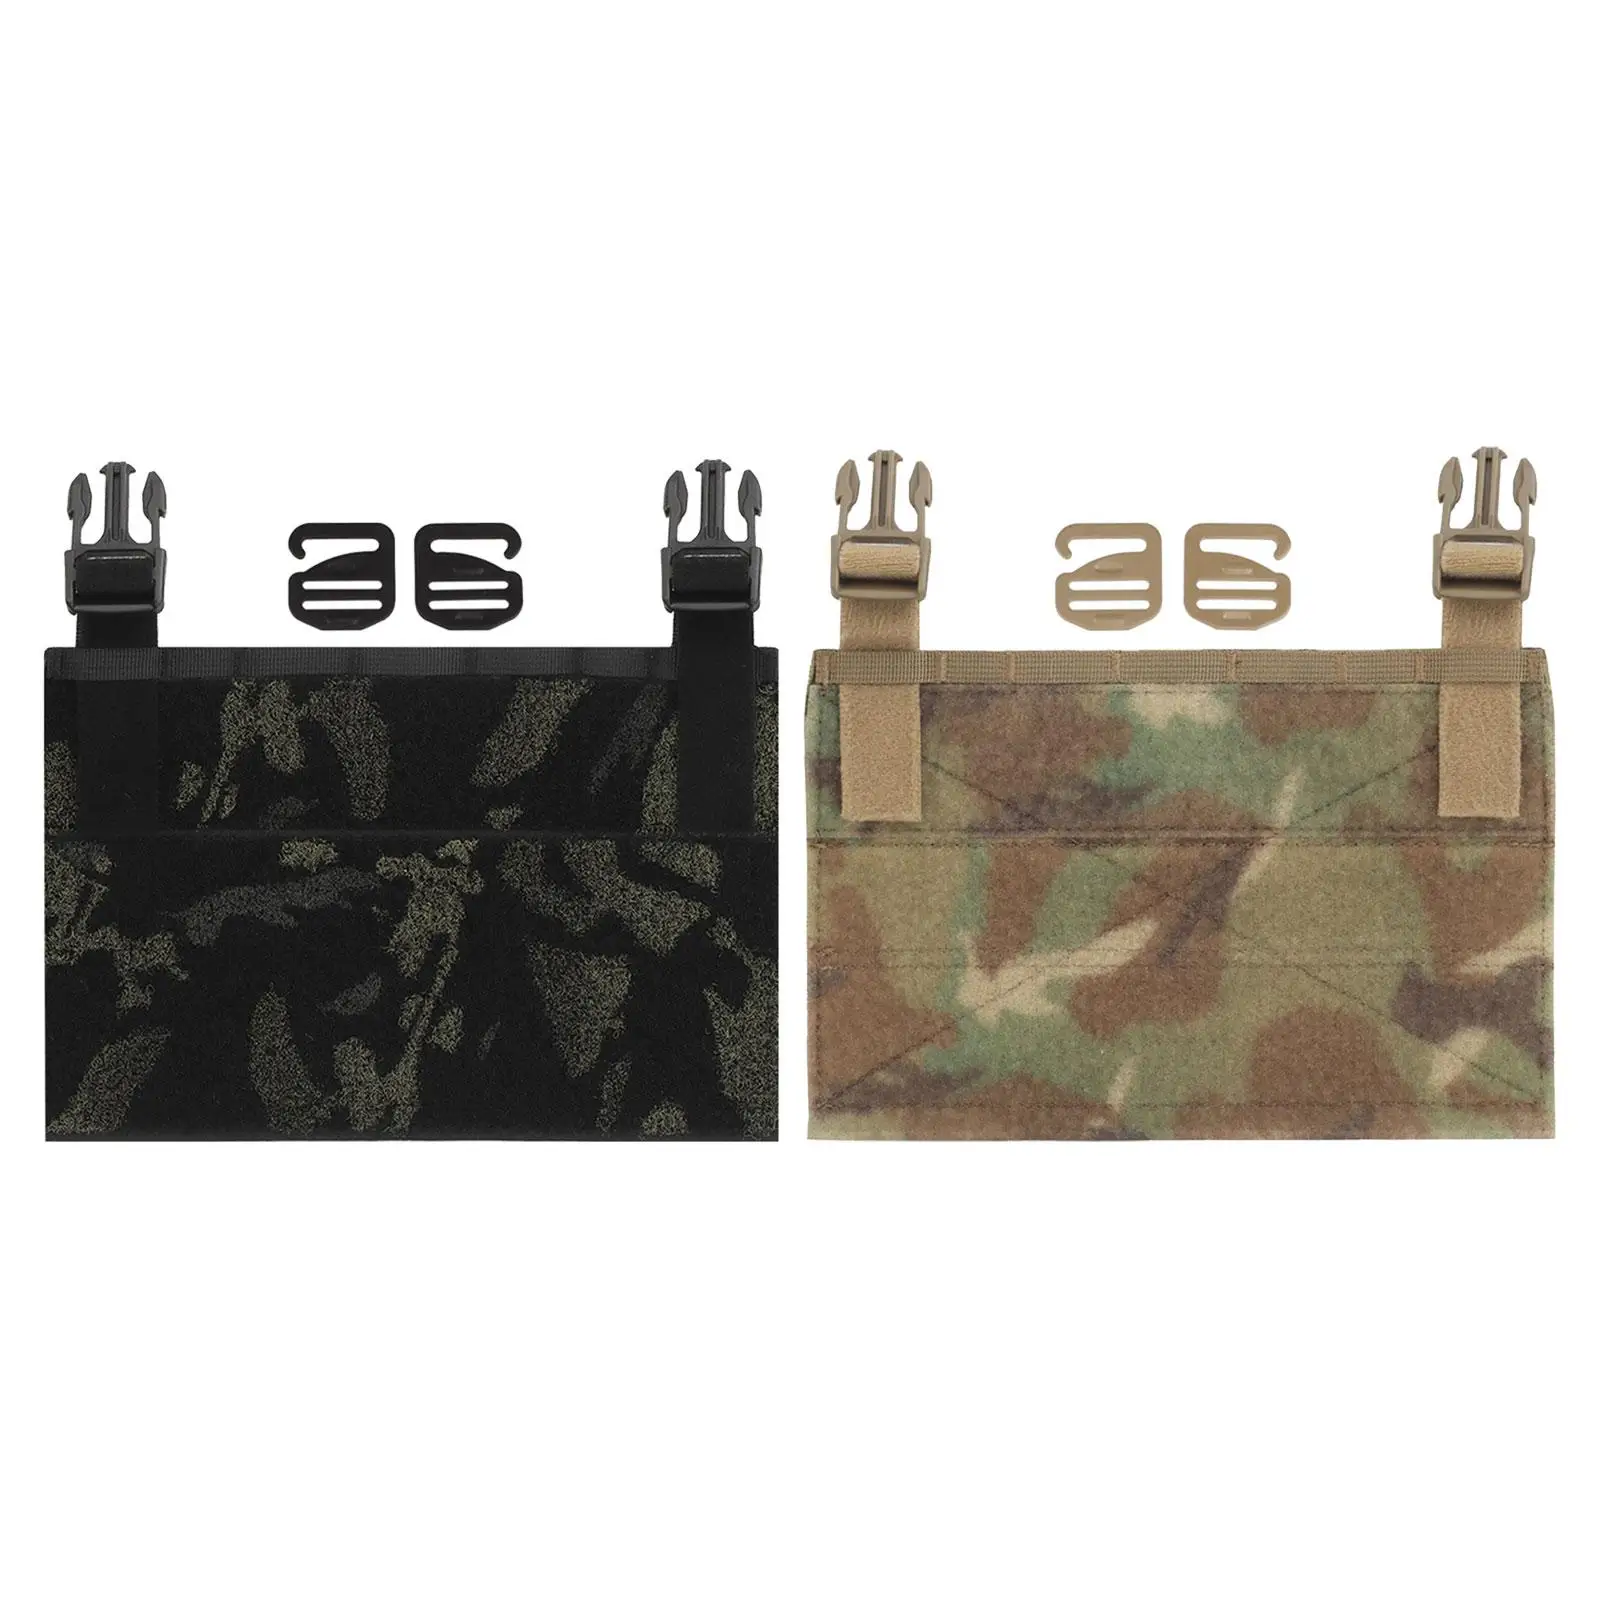 Outdoor Vest Front Panel Adapter Accessory Detachable Adults Accessories for Outdoor Activities Sports Game Travel